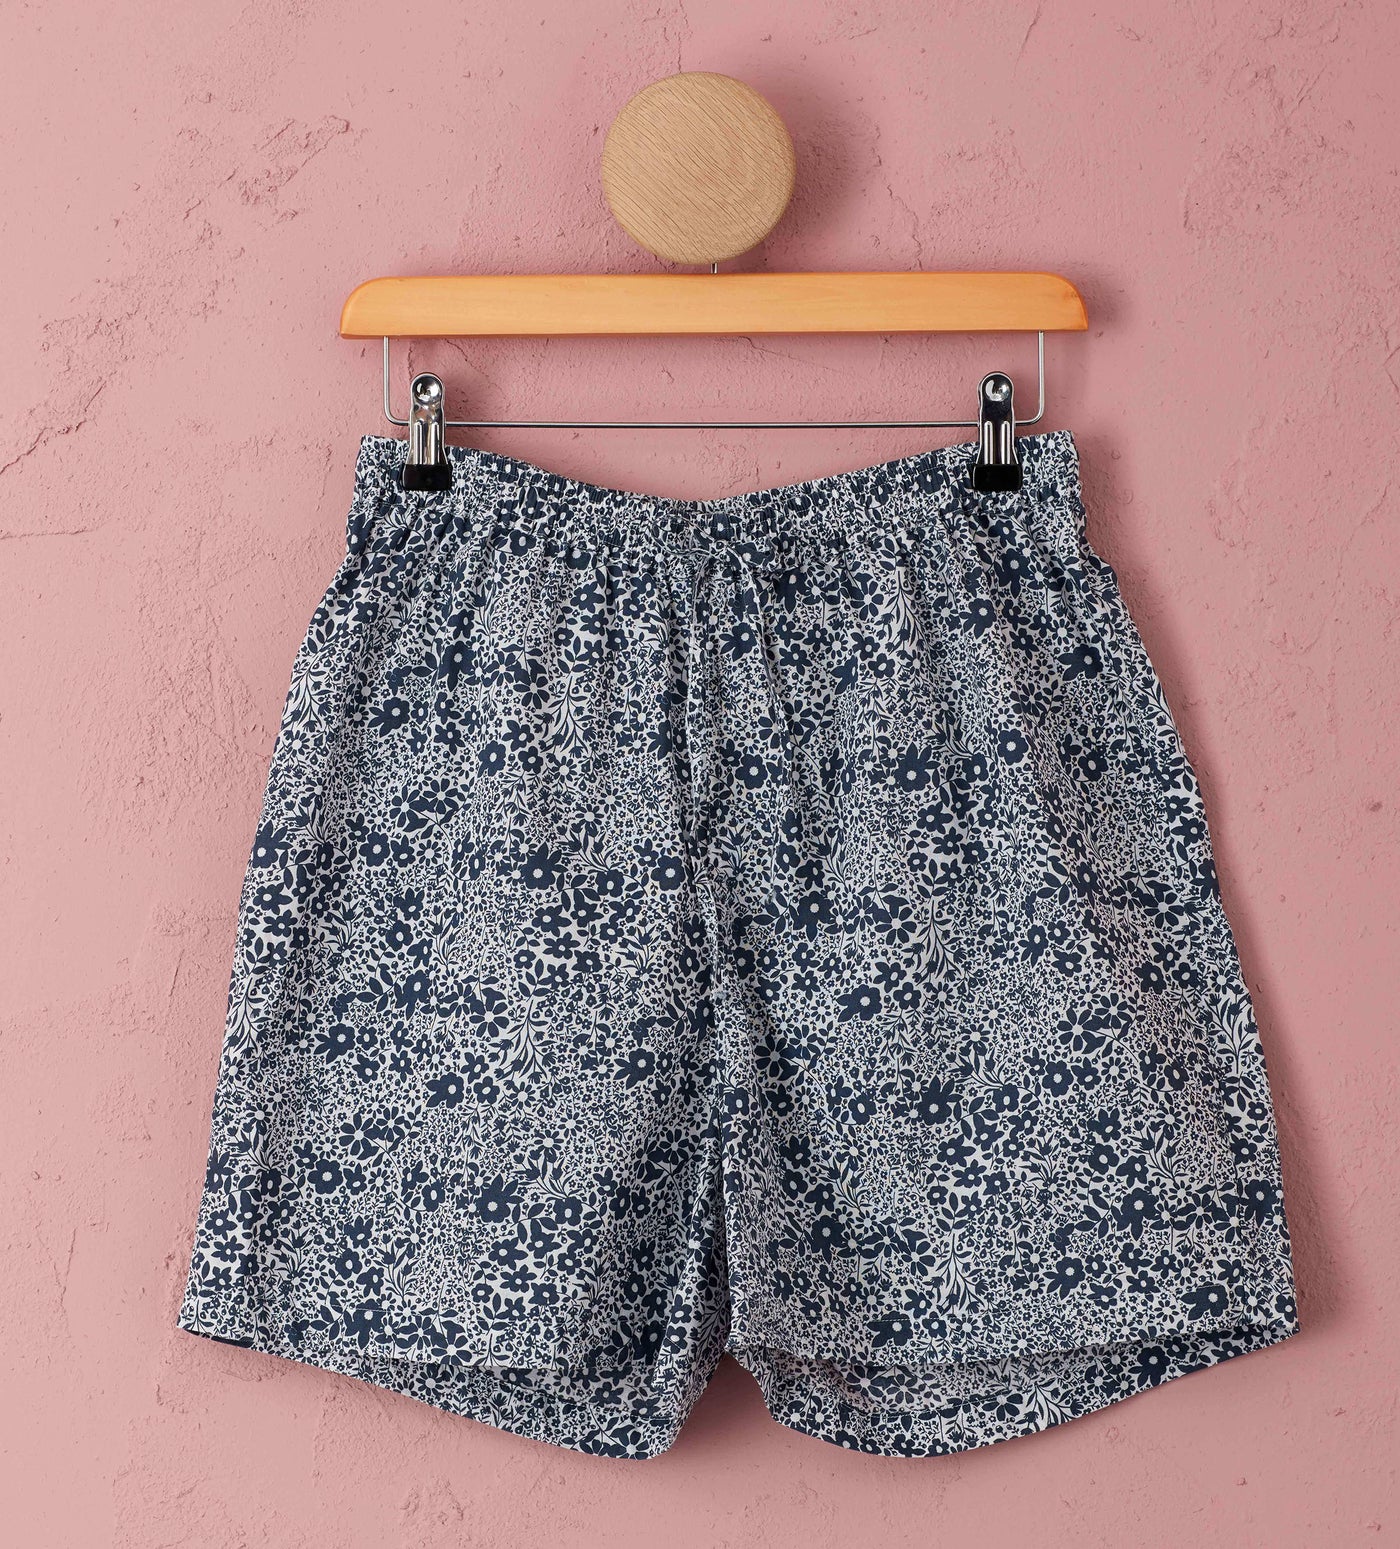 Evie Organic Pyjama Shorts Navy Cut Out Front